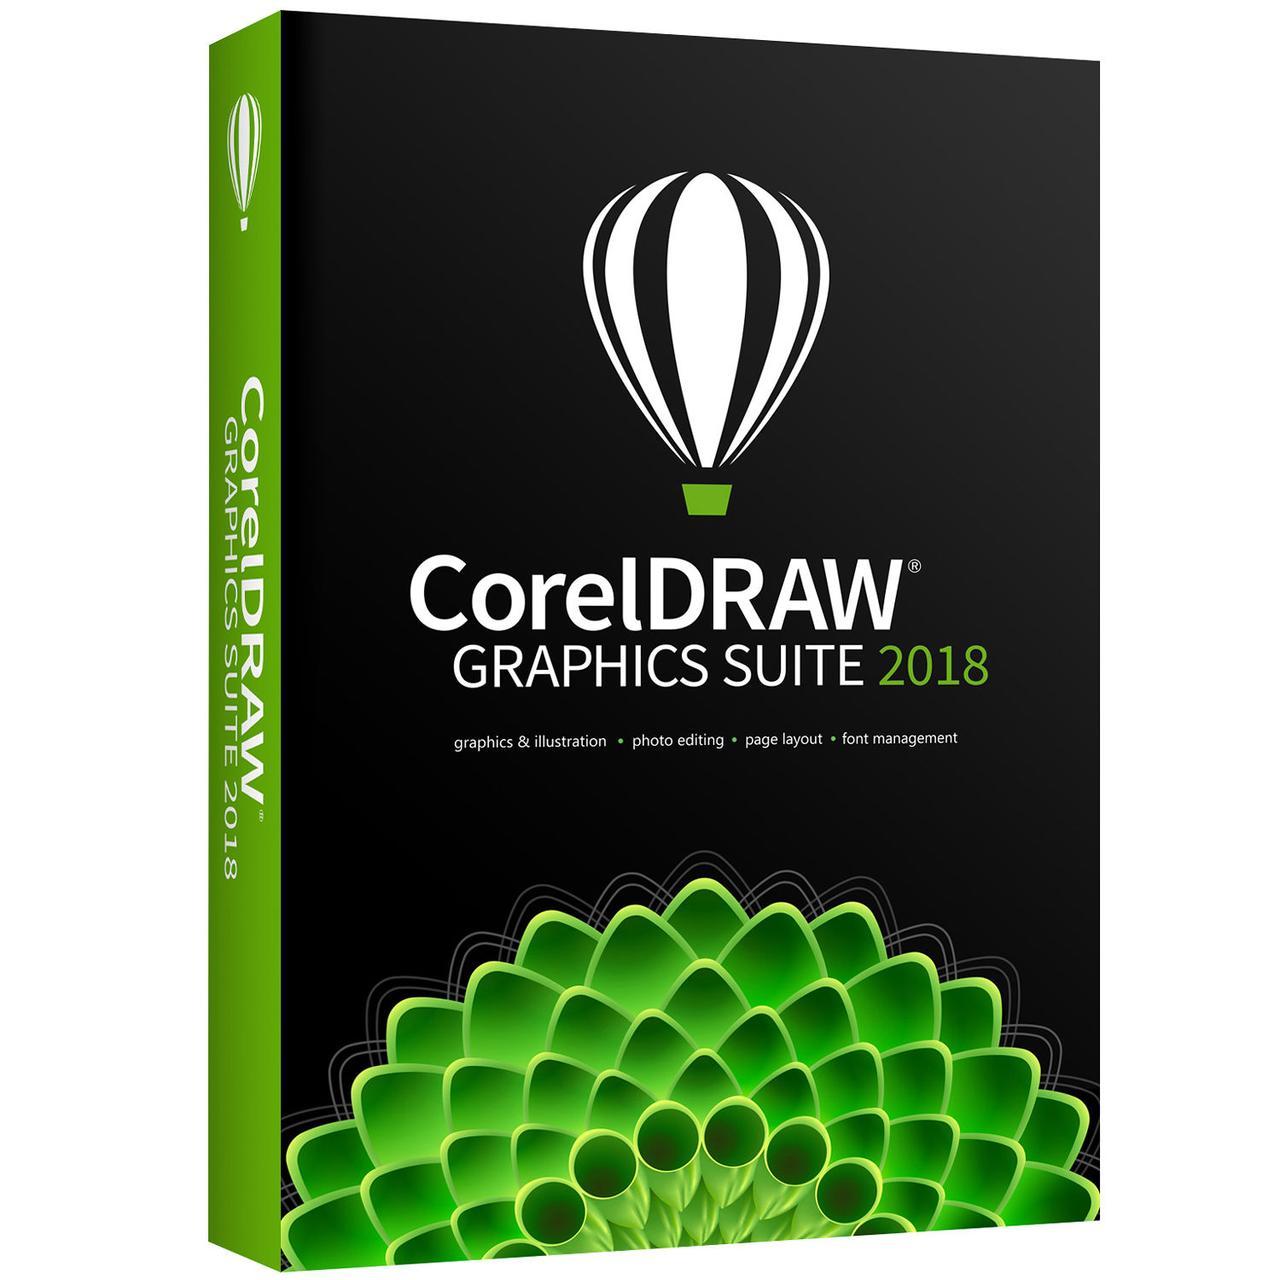 CorelDRAW Graphics Suite 365-Day Subs.